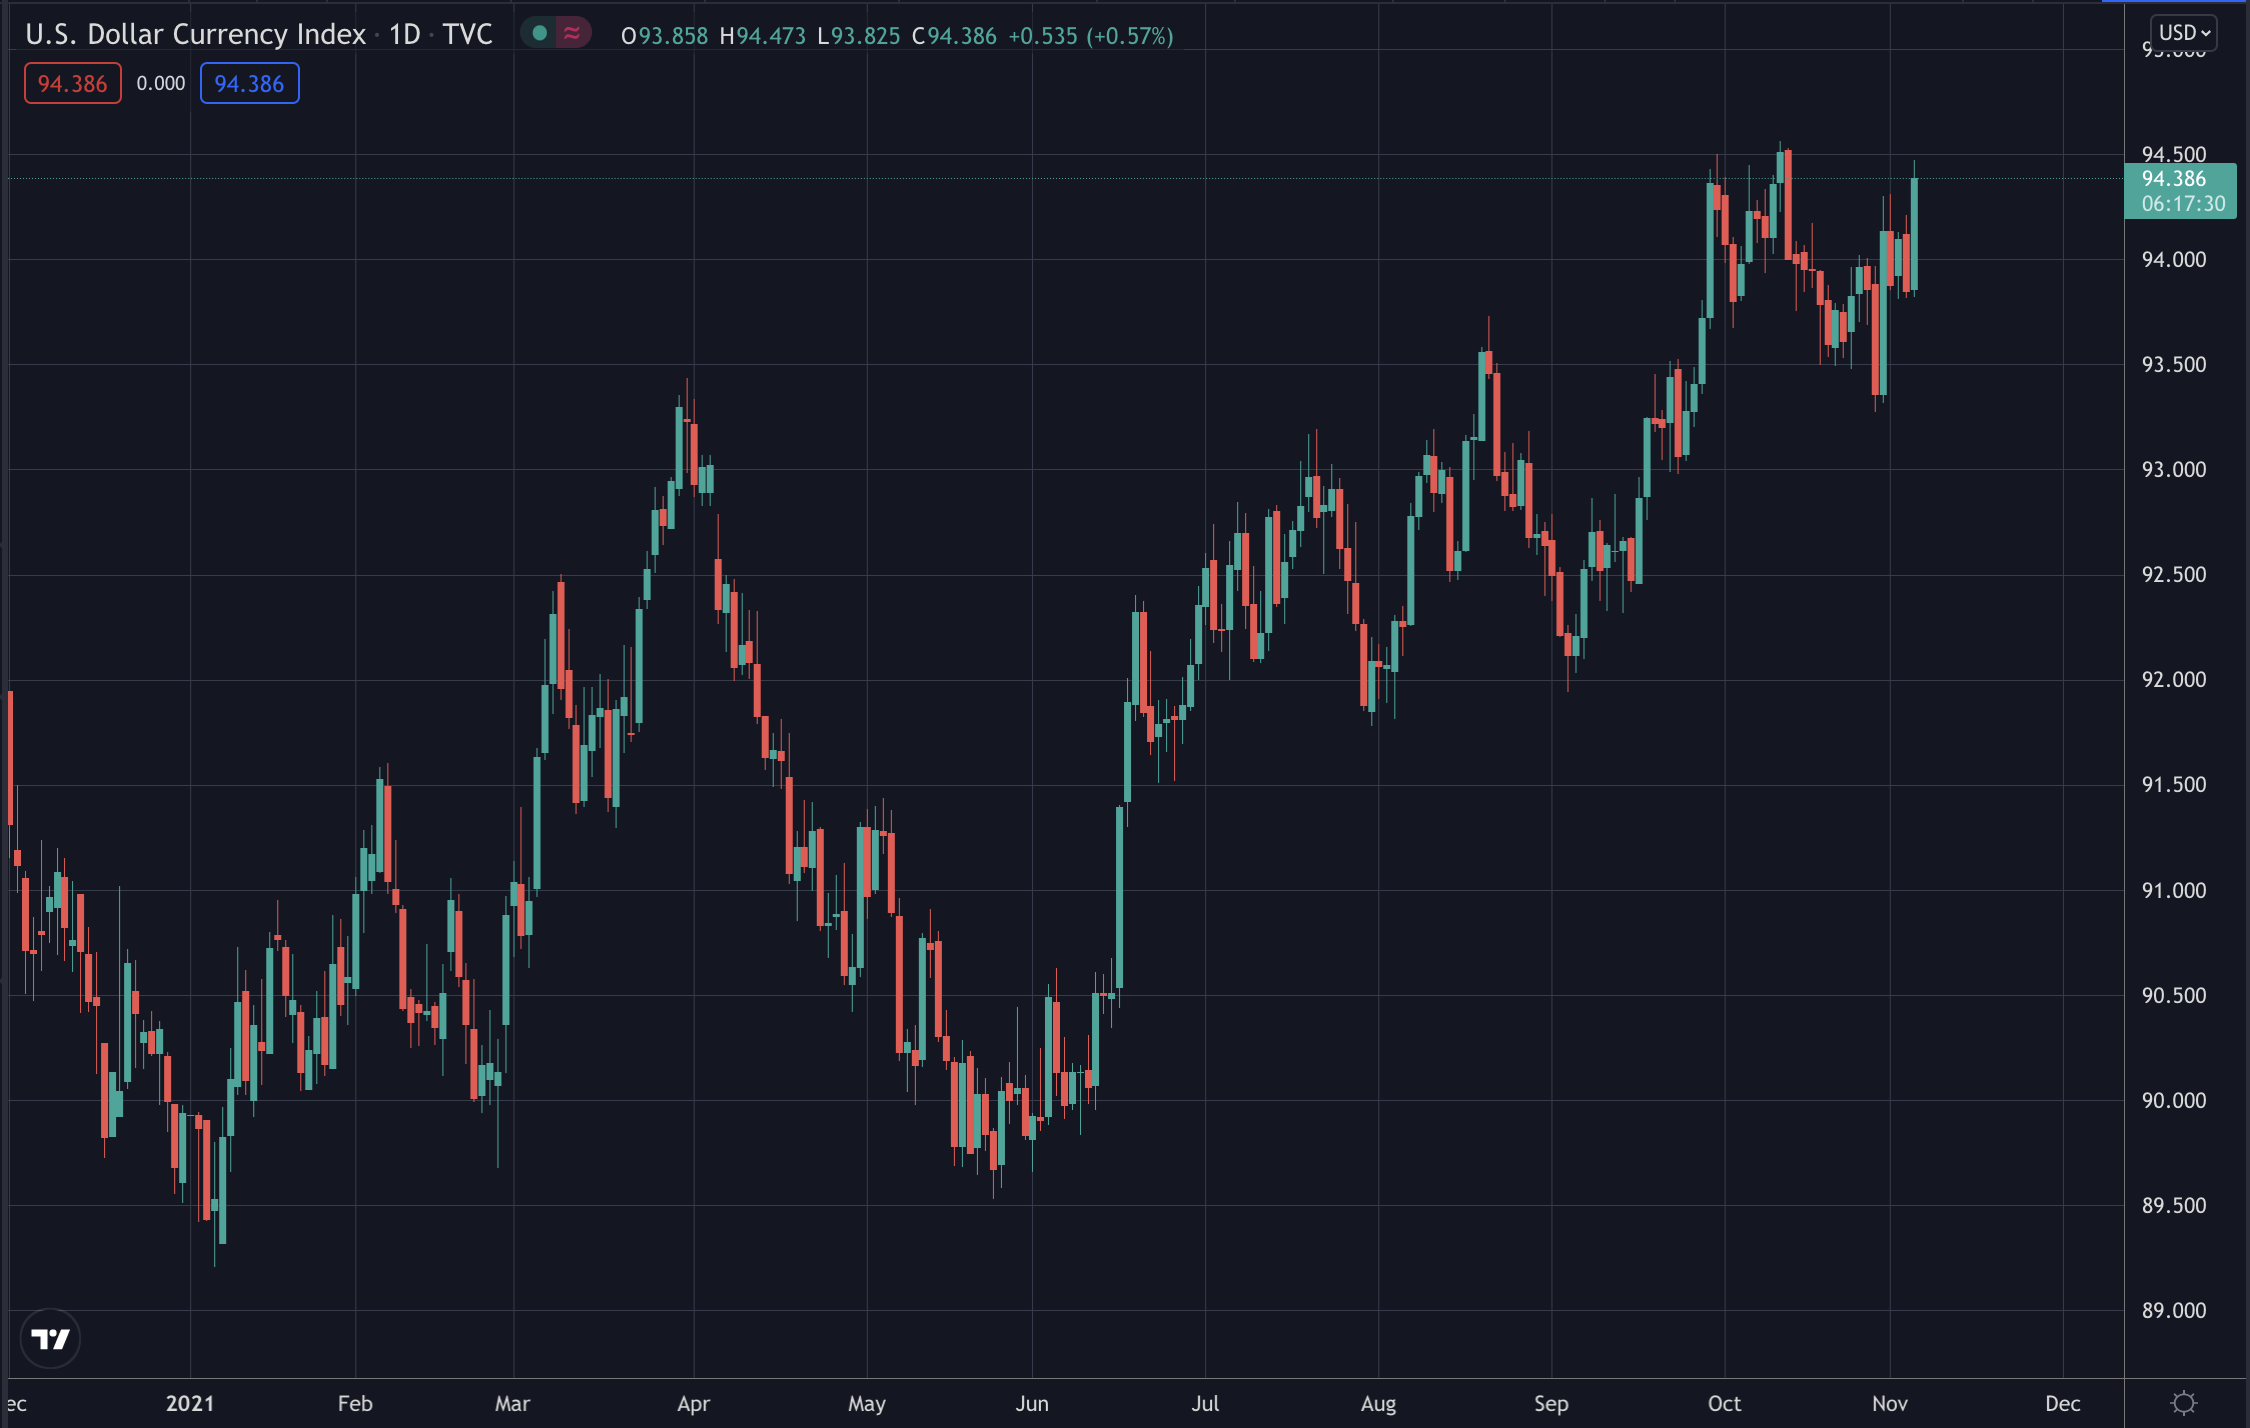 DXY, Oct 2021